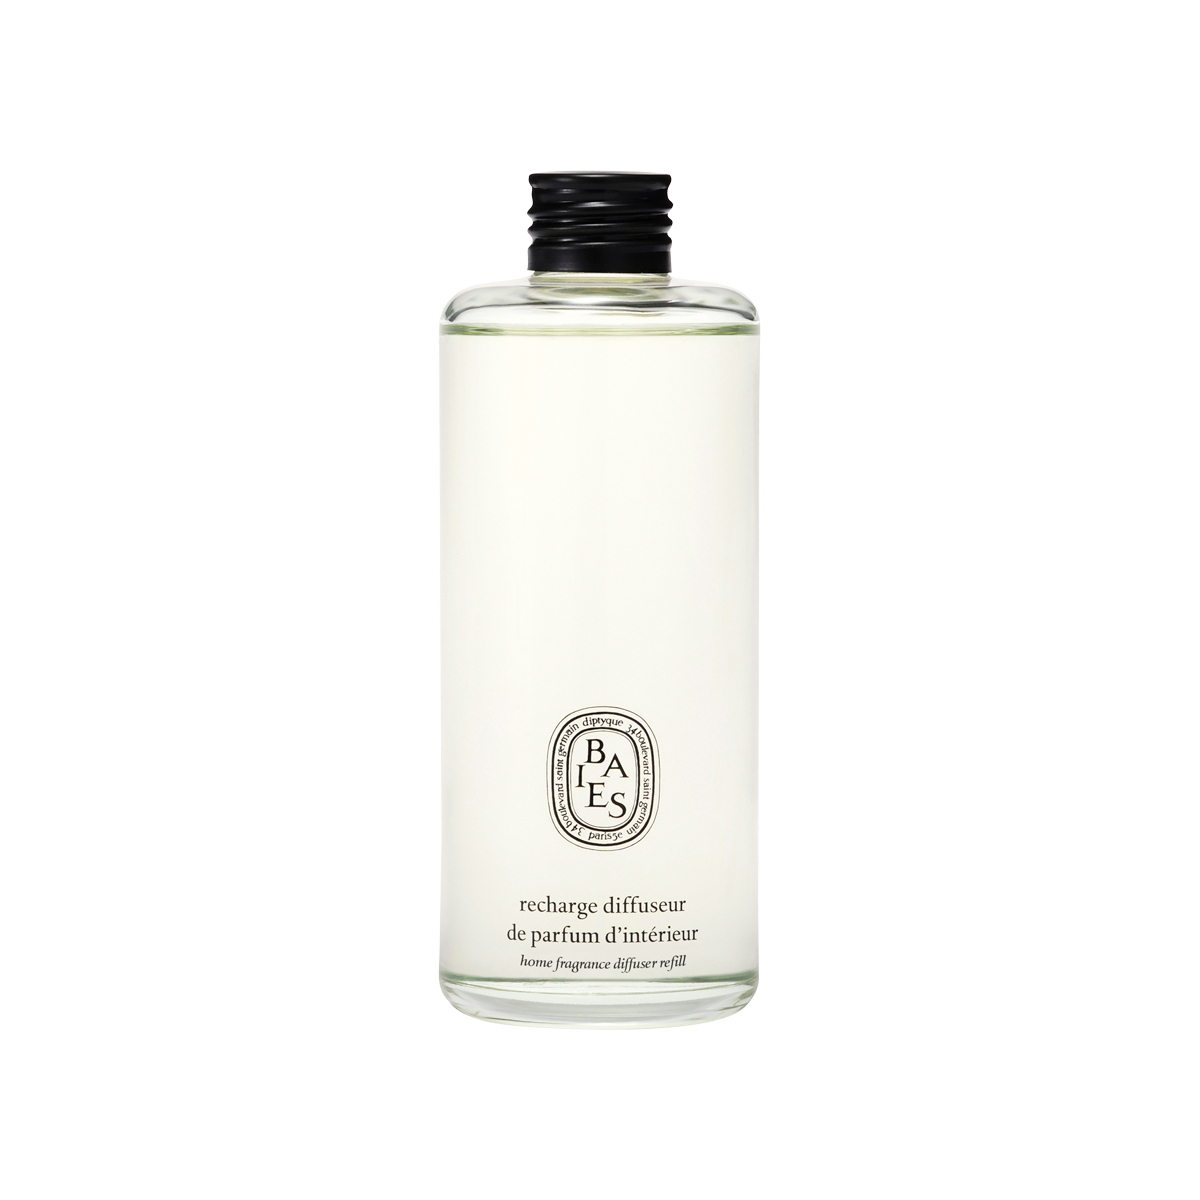 Diptyque - Baies Home Fragrance Diffuser Refill